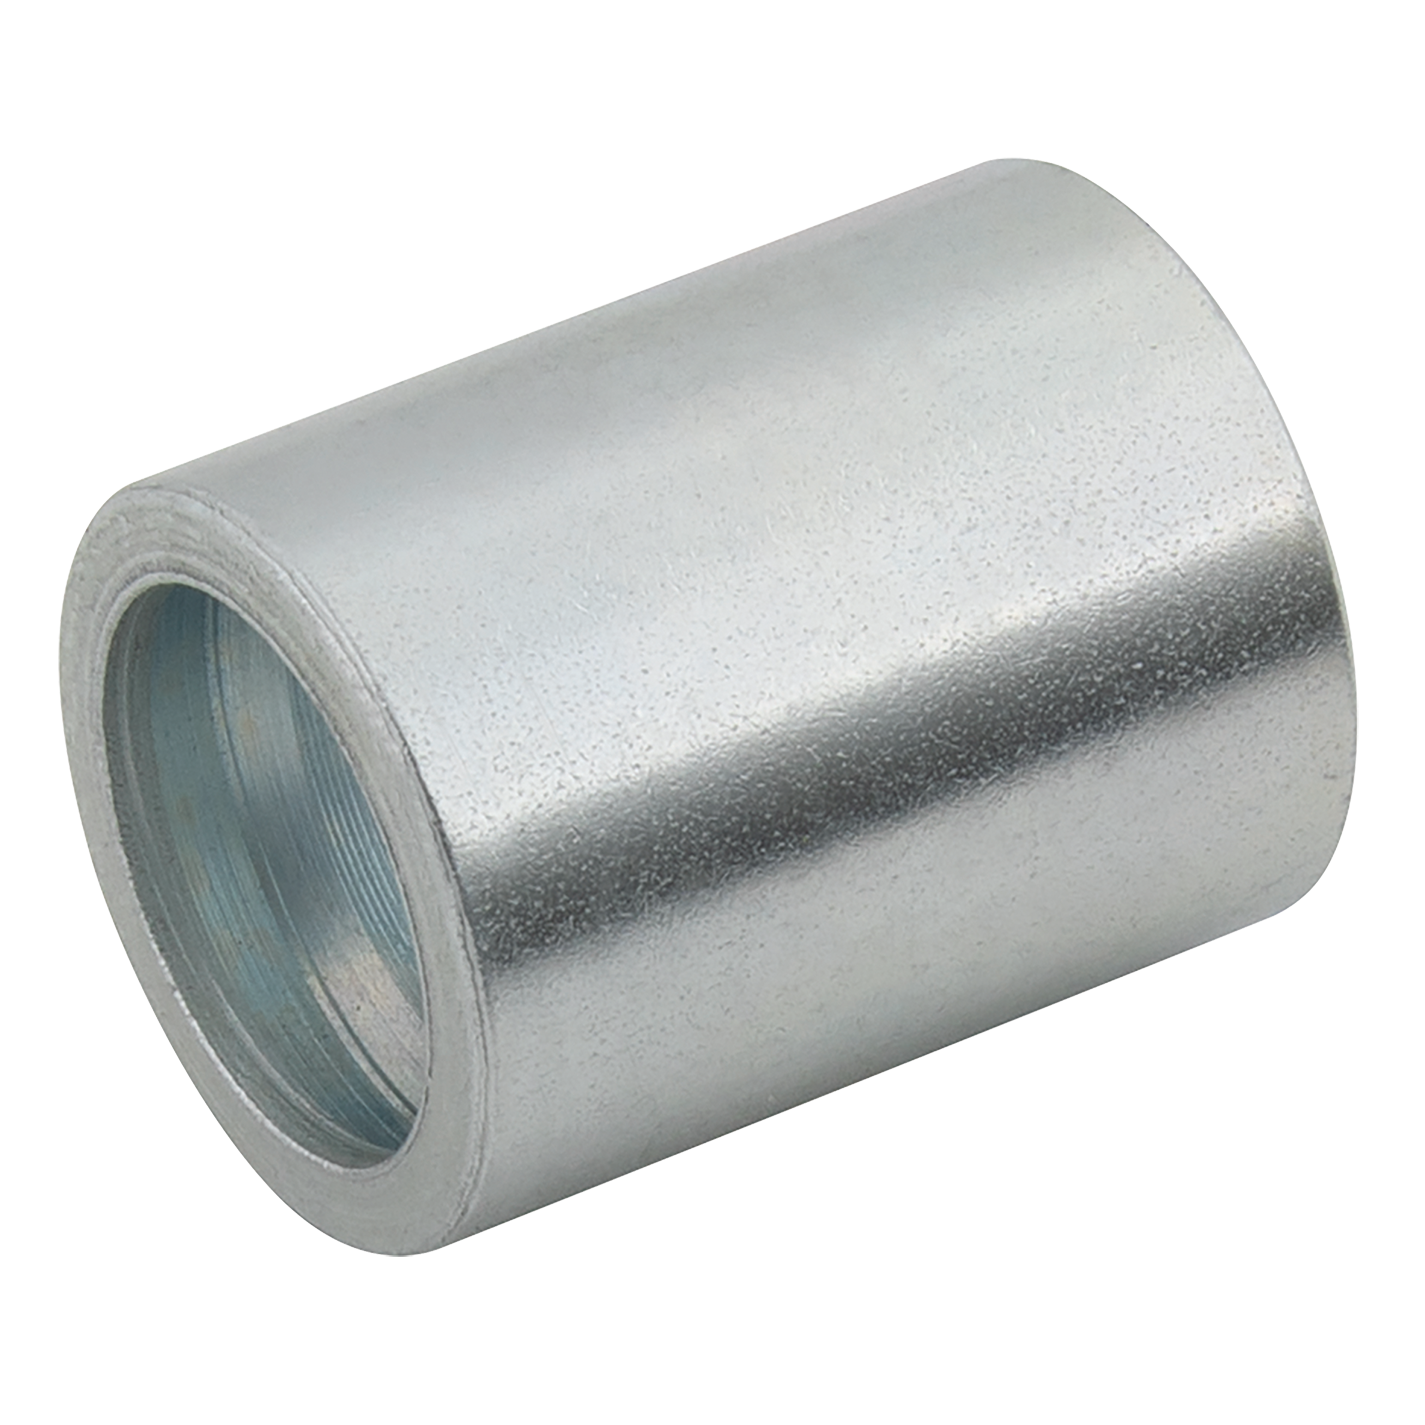  3/4"Hose Insert Ferrule Smooth and Convoluted Bore